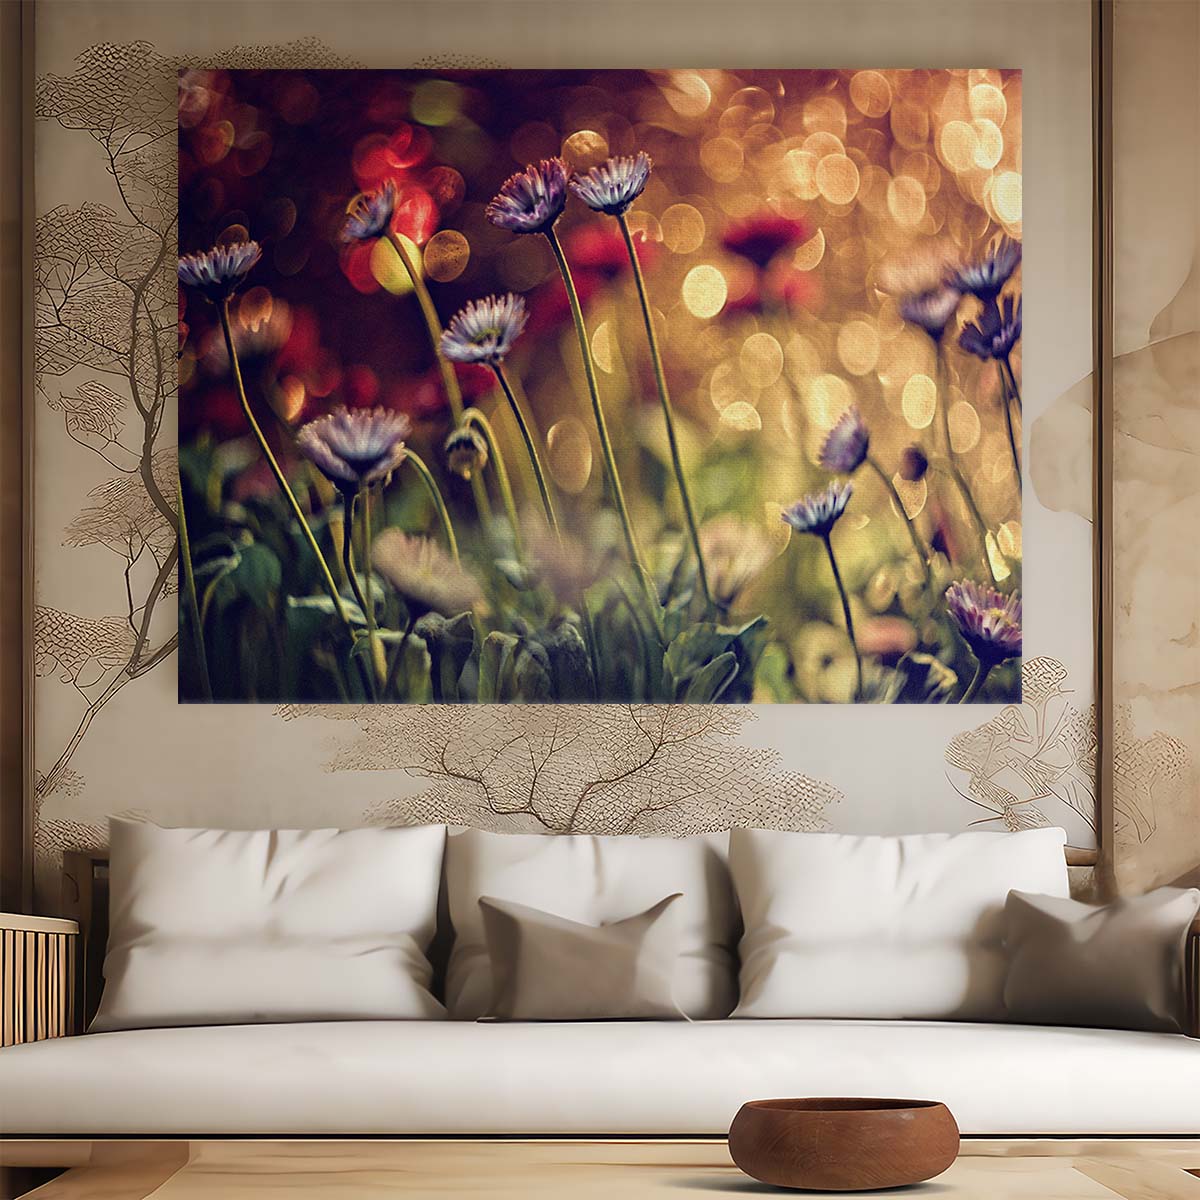 Colorful Summer Garden Macro Floral Wall Art by Luxuriance Designs. Made in USA.